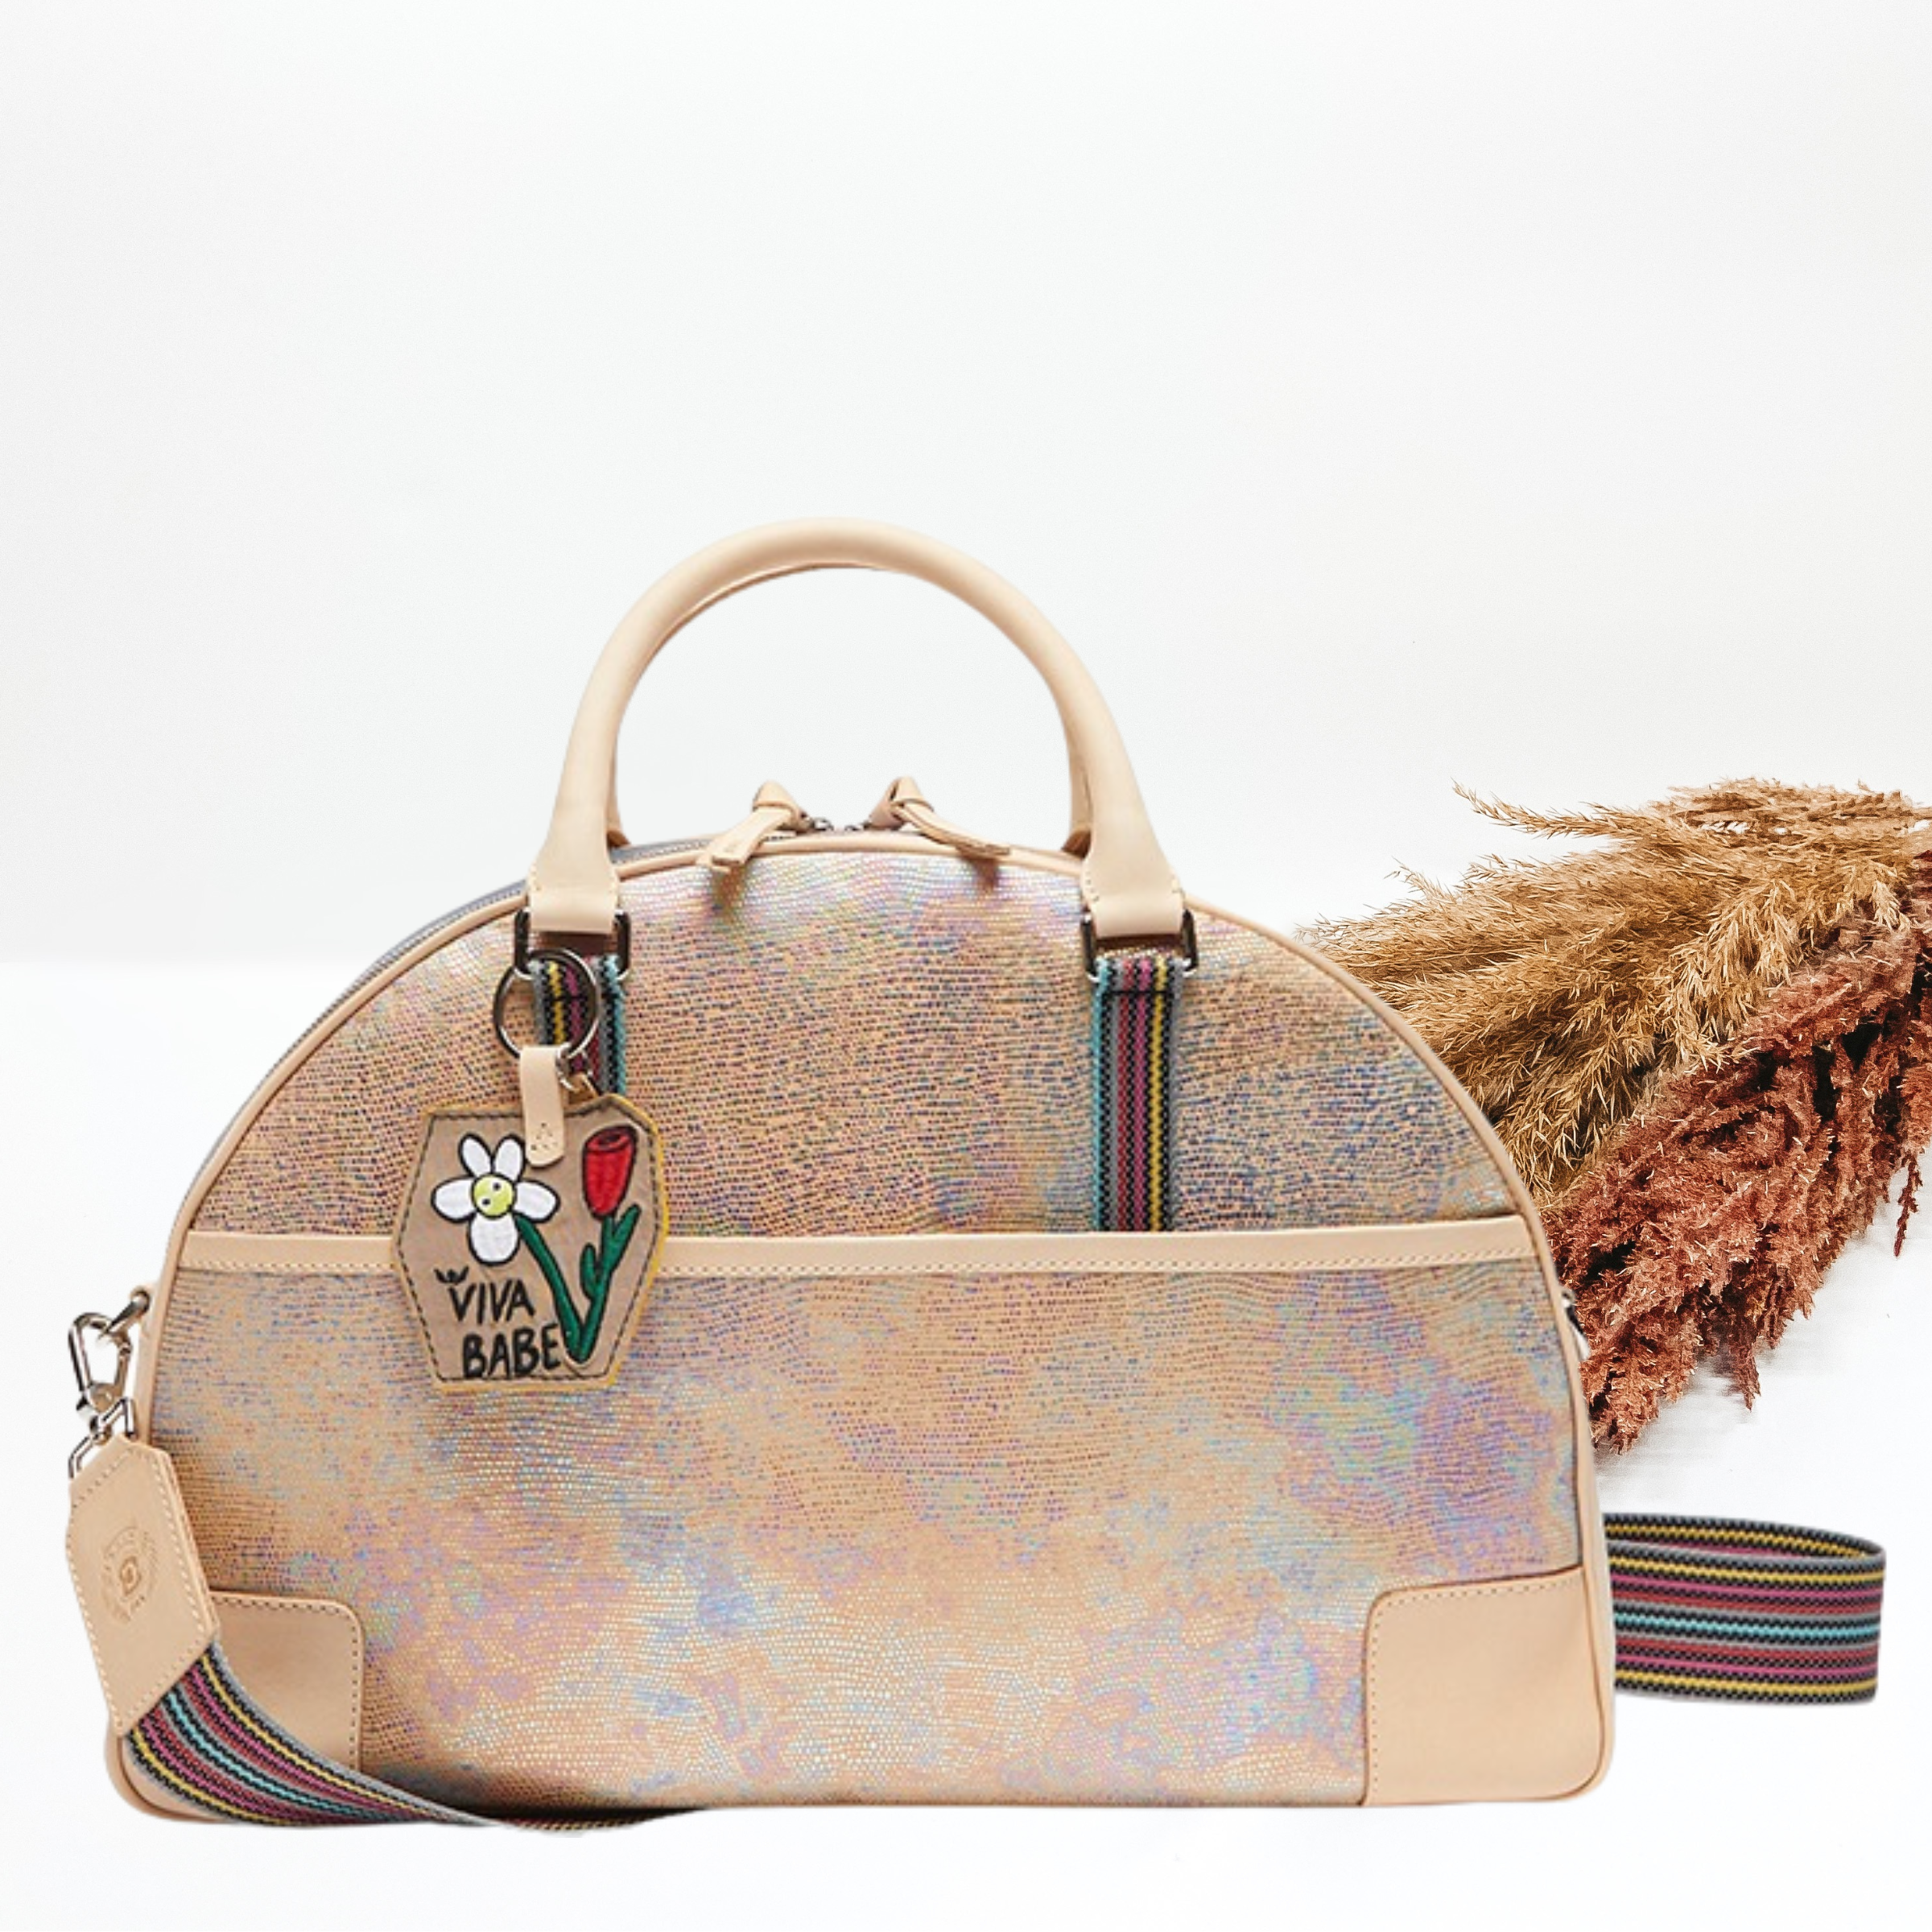 Pictured is a dome shaped bag with light tan short handles and a striped strap. This bag is a multicolor iridescent print with light tan accents and a charm on one of the handles. This bag is pictured on a white background with pompous grass on the right side of the bag. 